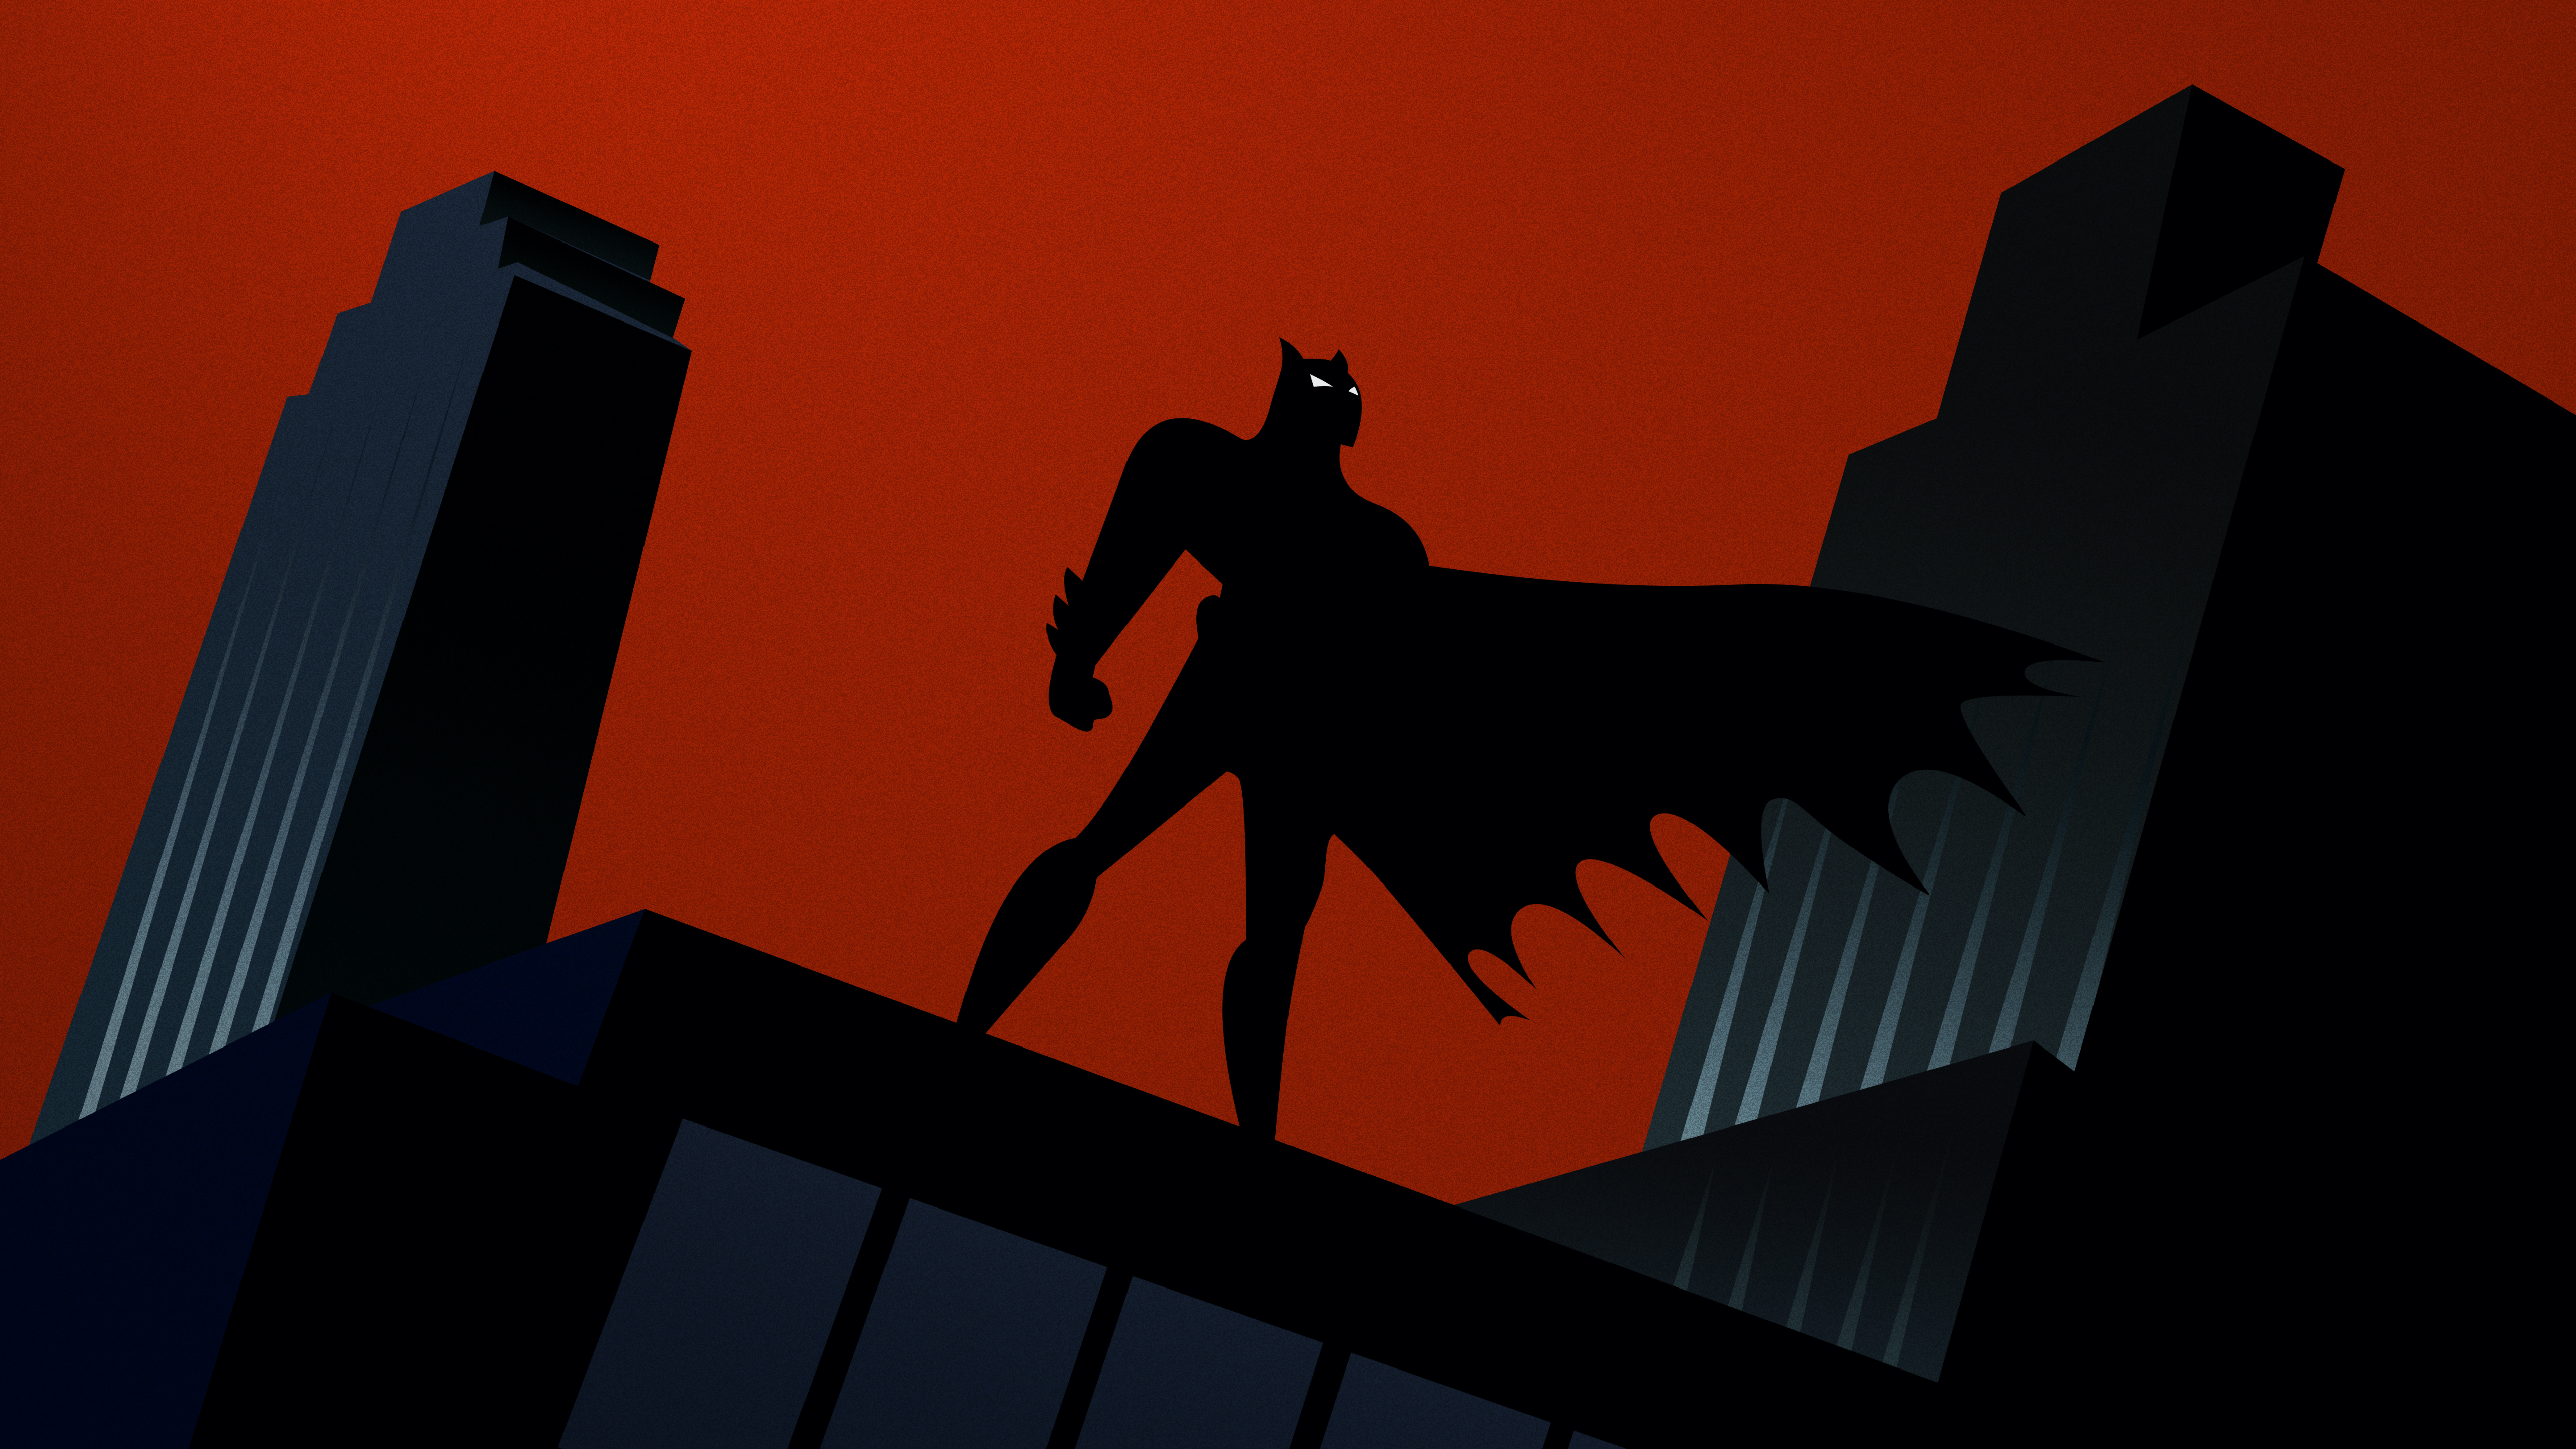 TV Show Batman: The Animated Series HD Wallpaper | Background Image